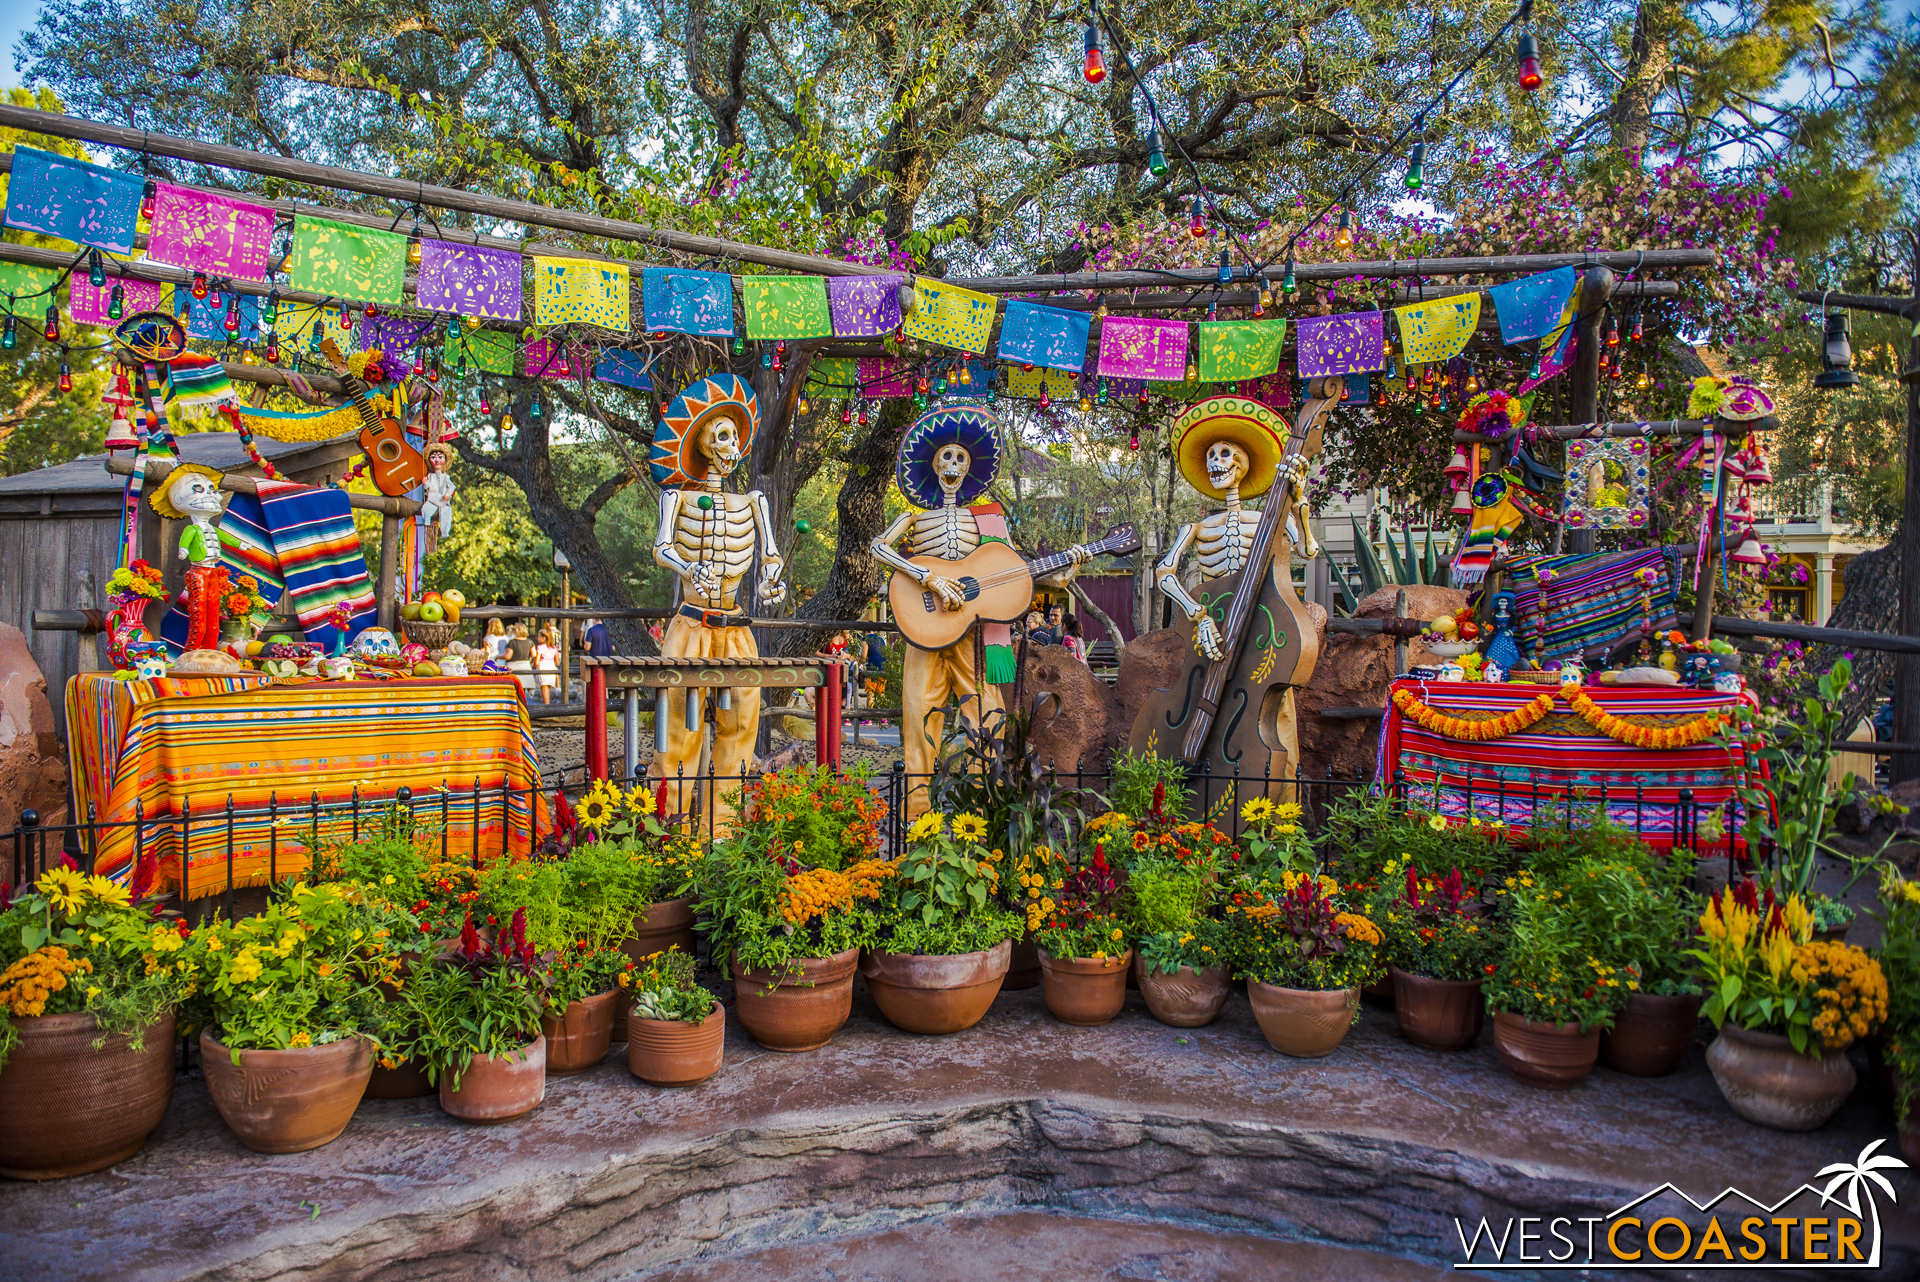  It celebrates the Mexican Day of the Dead. 